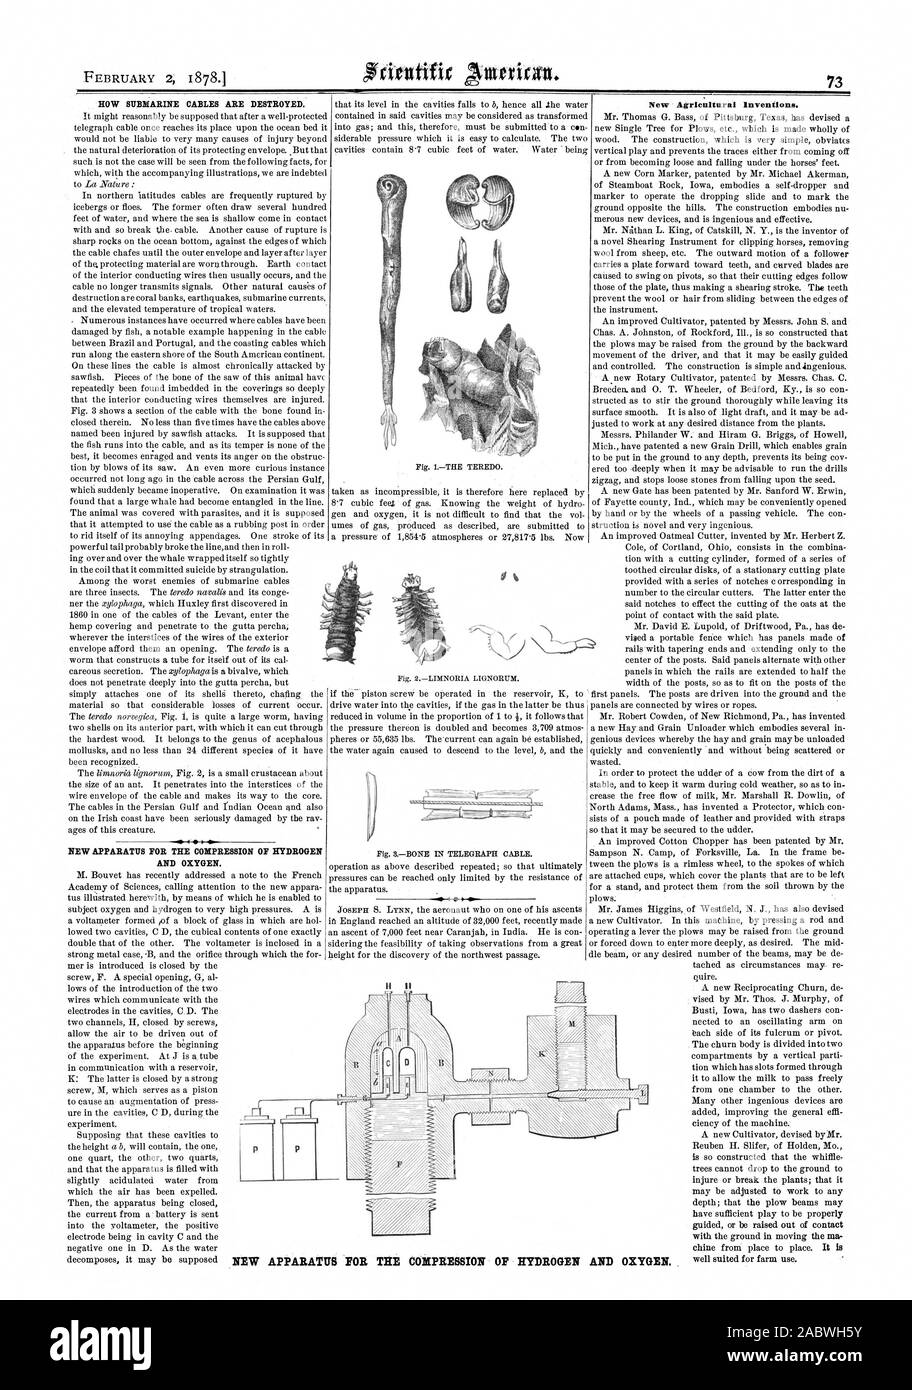 FOR THE COMPRESSION OF HYDROGEN HOW SUBMARINE CABLES ARE DESTROYED. NEW APPARATUS FOR THE COMPRESSION OF HYDROGEN AND OXYGEN. New Agricultural Inventions. NEW APPARATUS, scientific american, 1878-02-02 Stock Photo